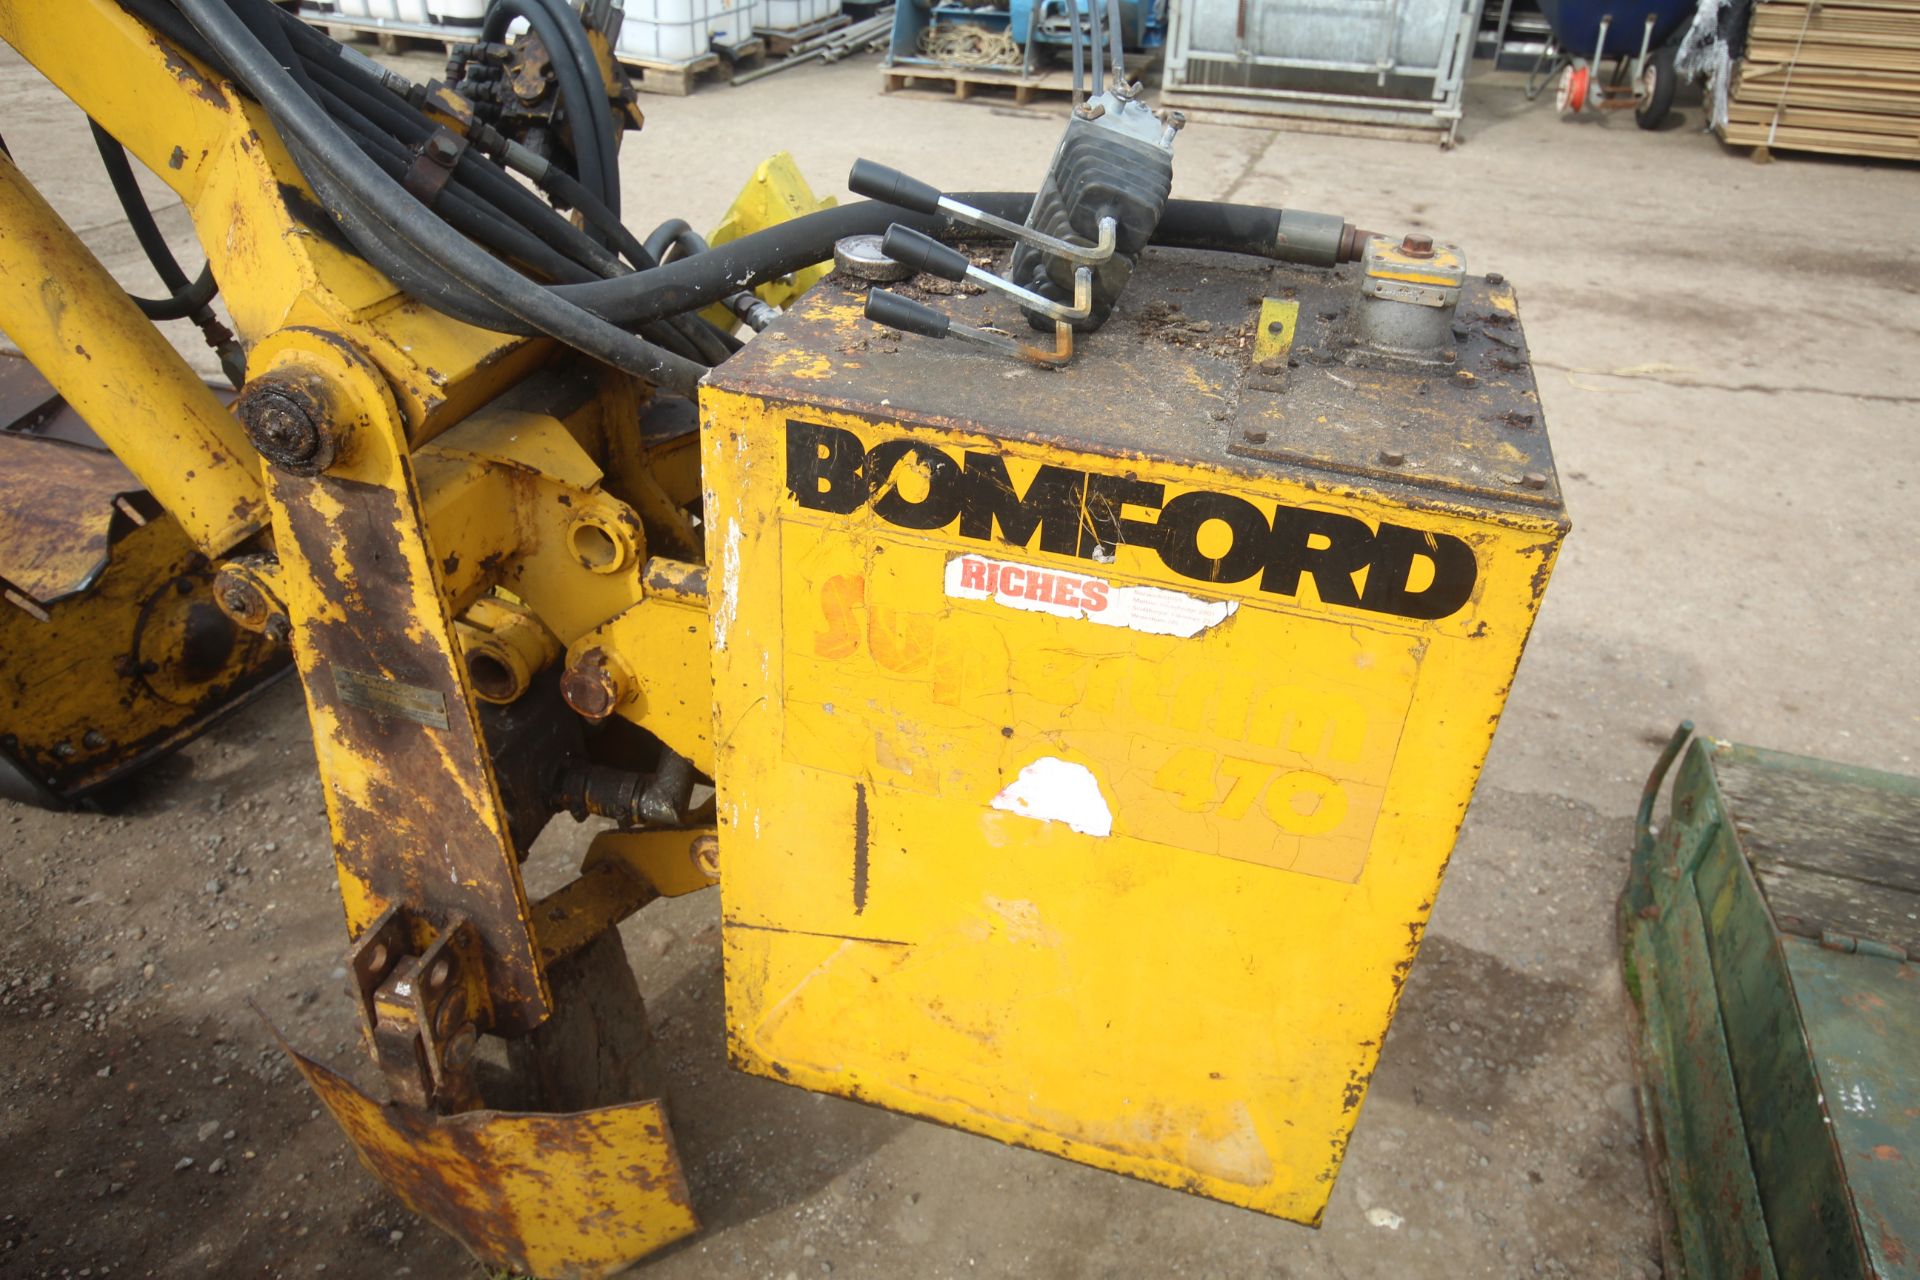 Bomford Super Trim 470 hedge cutter. With linkage conversion headstock and cable controlled spools. - Image 5 of 20